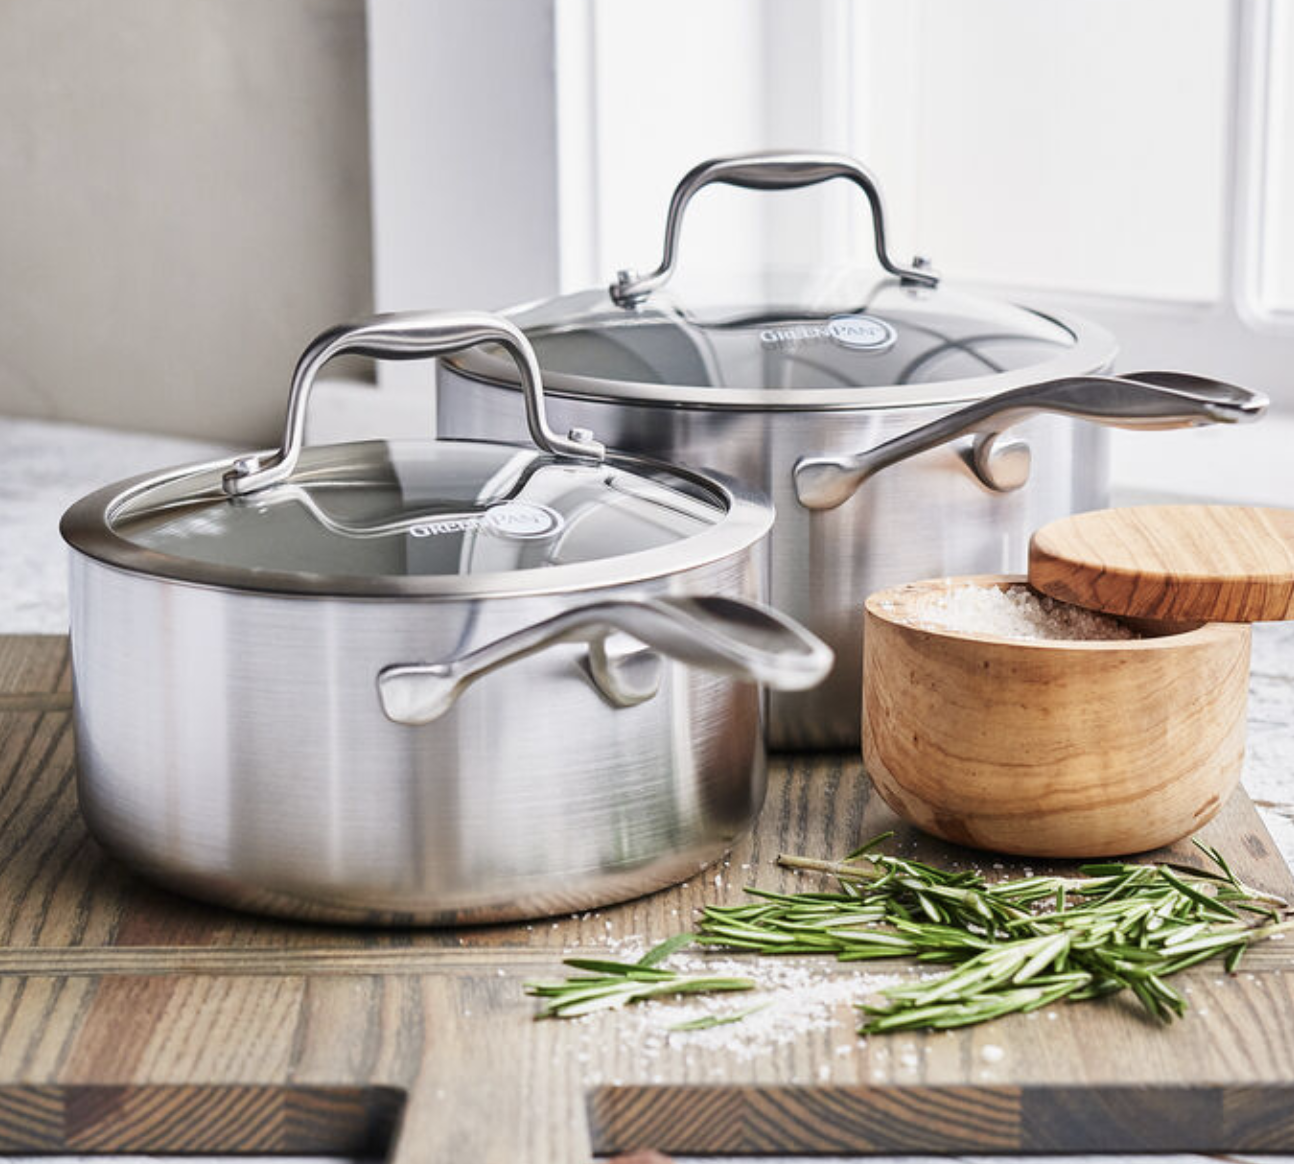 Most-Useful Kitchen Products On Sale at Sur La Table